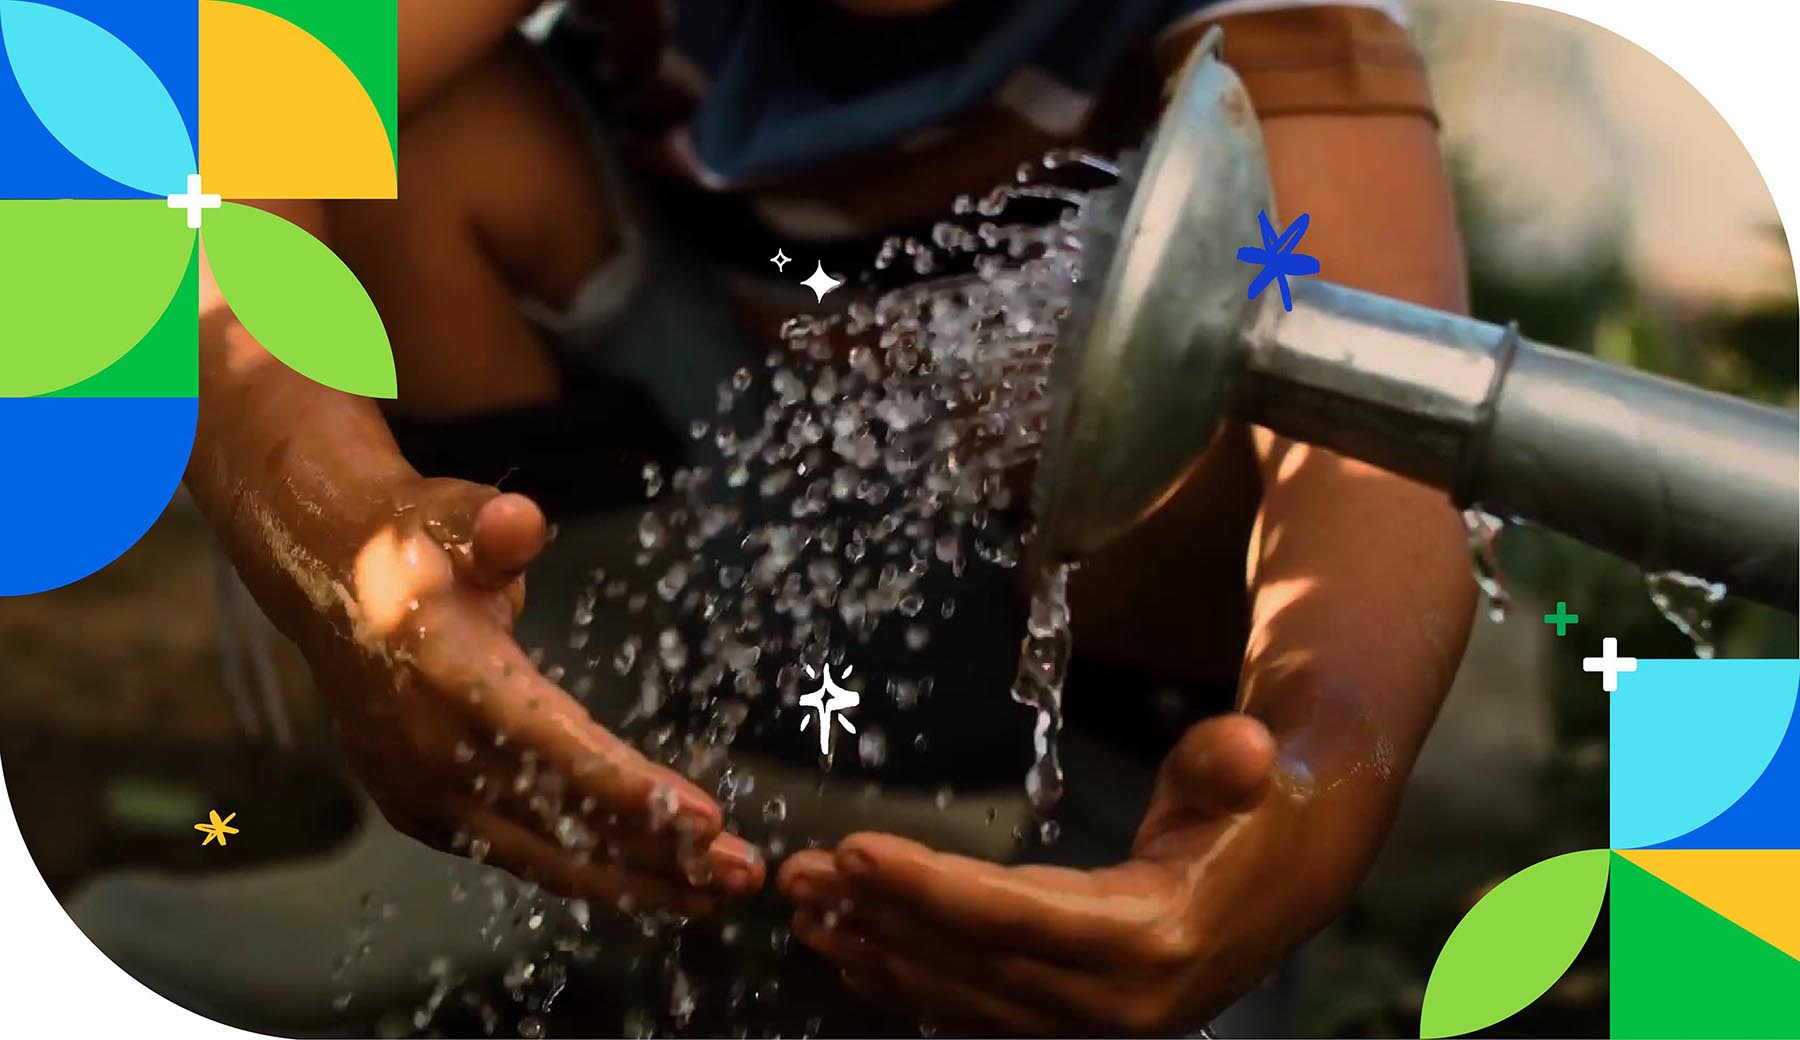 Child's hands collect droplets of water from watering can